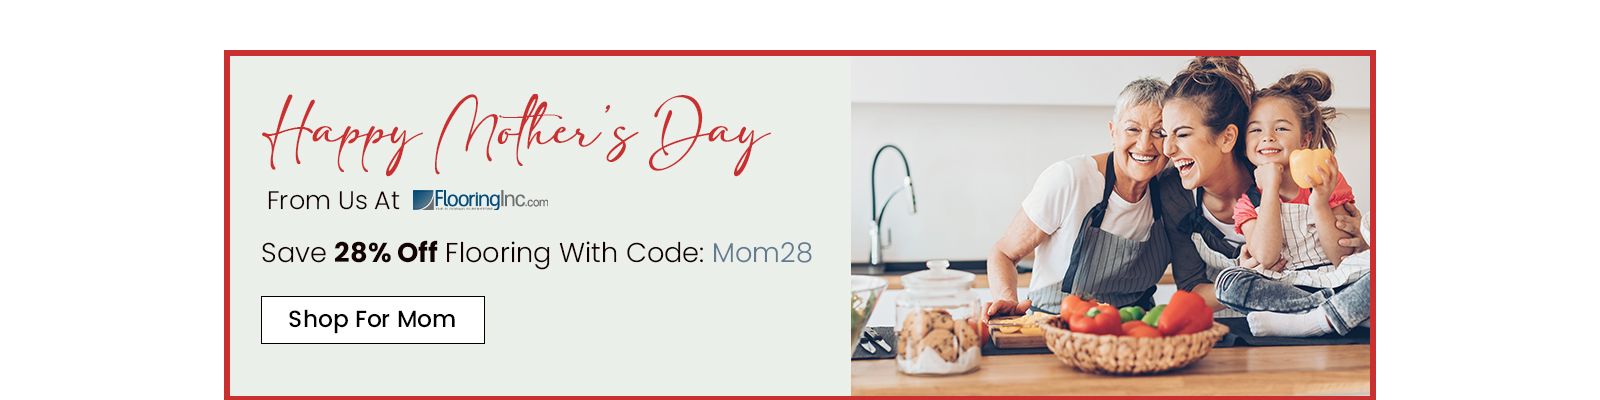 Home page banner image: fi-mothers-day-hp.jpg